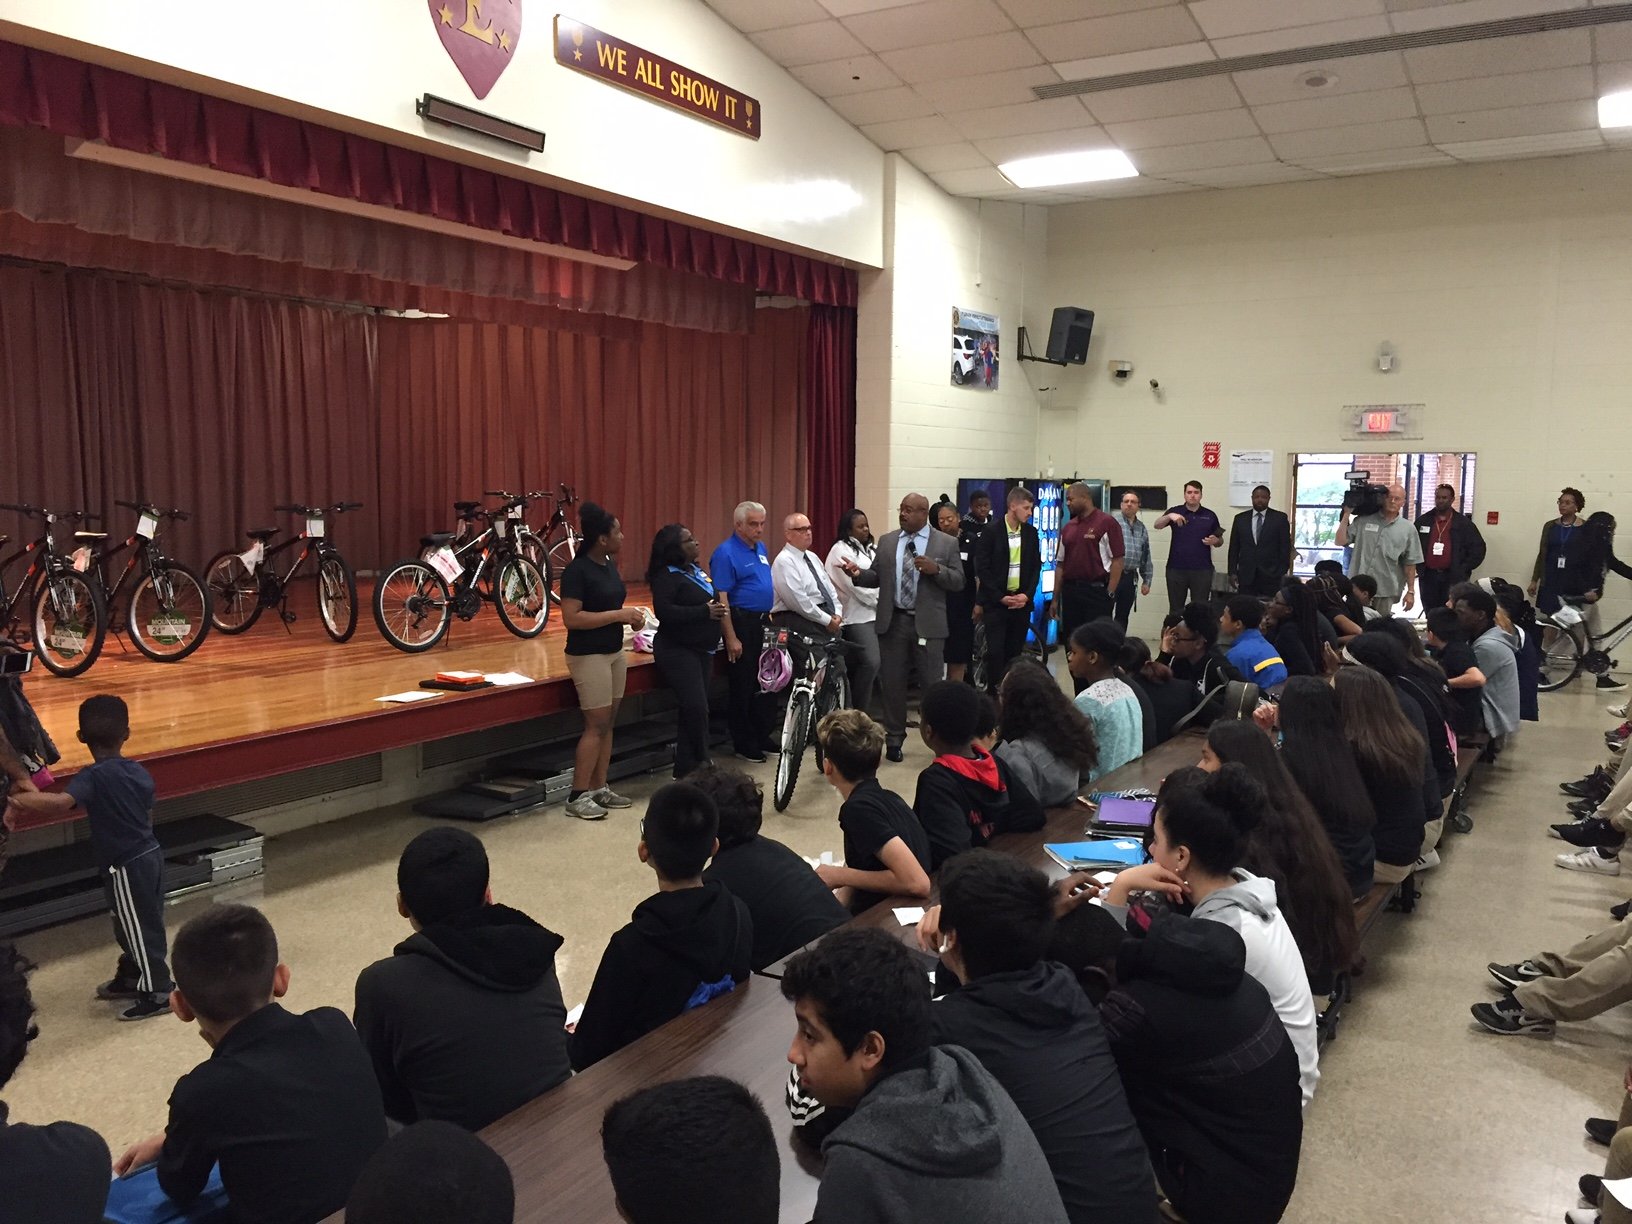 Seventh-graders with perfect attendance at Dwight D. Eisenhower Middle School, in Laurel, got free bikes Thursday. (WTOP/Dennis Foley)